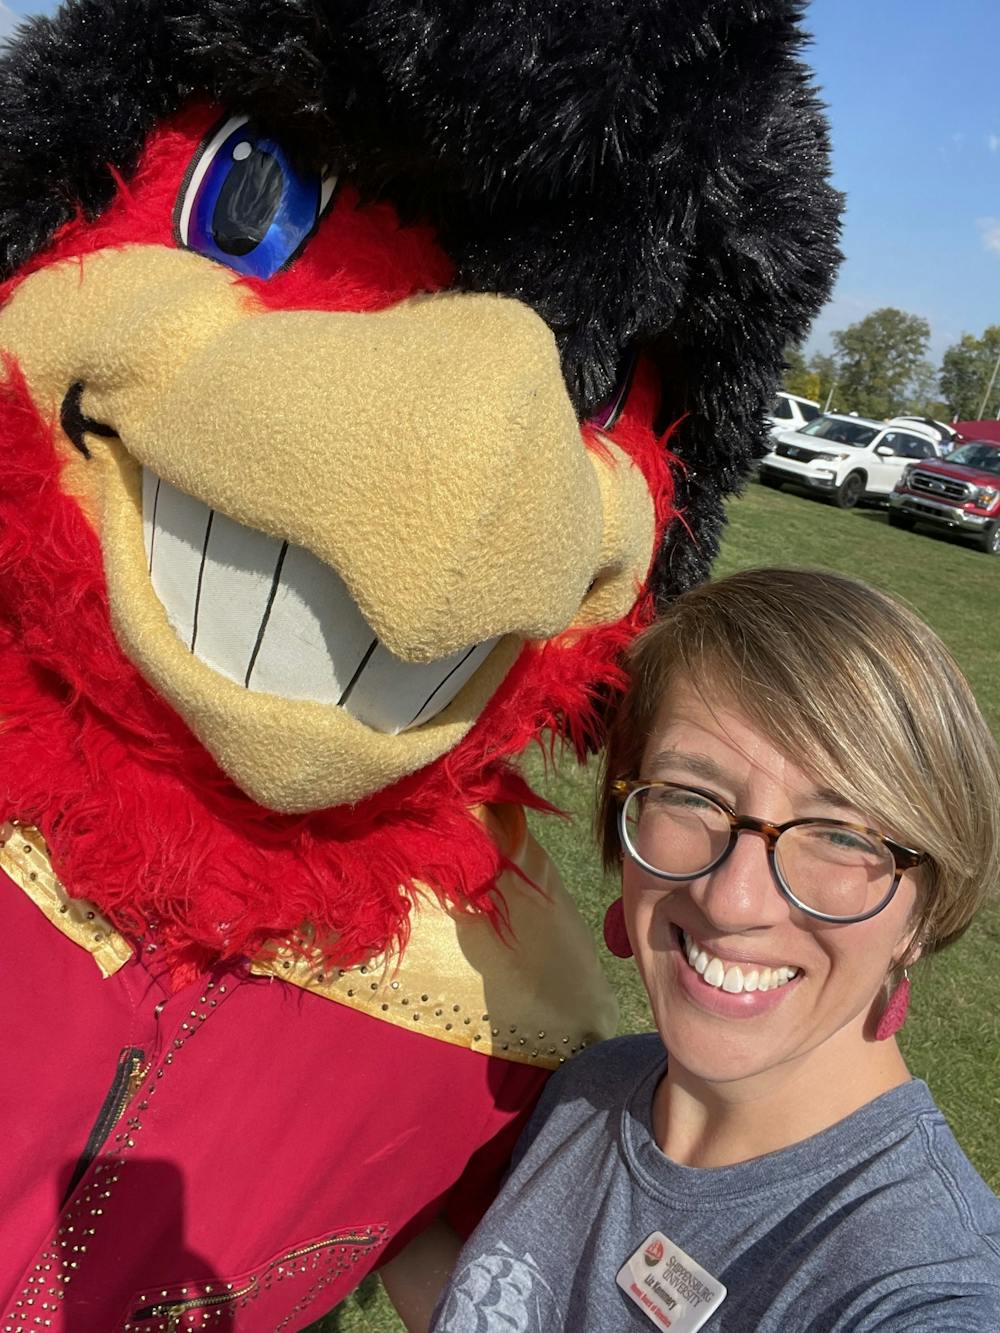 Mudcats No More: Spoon River College Ditches Mascot After Minor League Team  Threatens to Sue, St. Louis Metro News, St. Louis